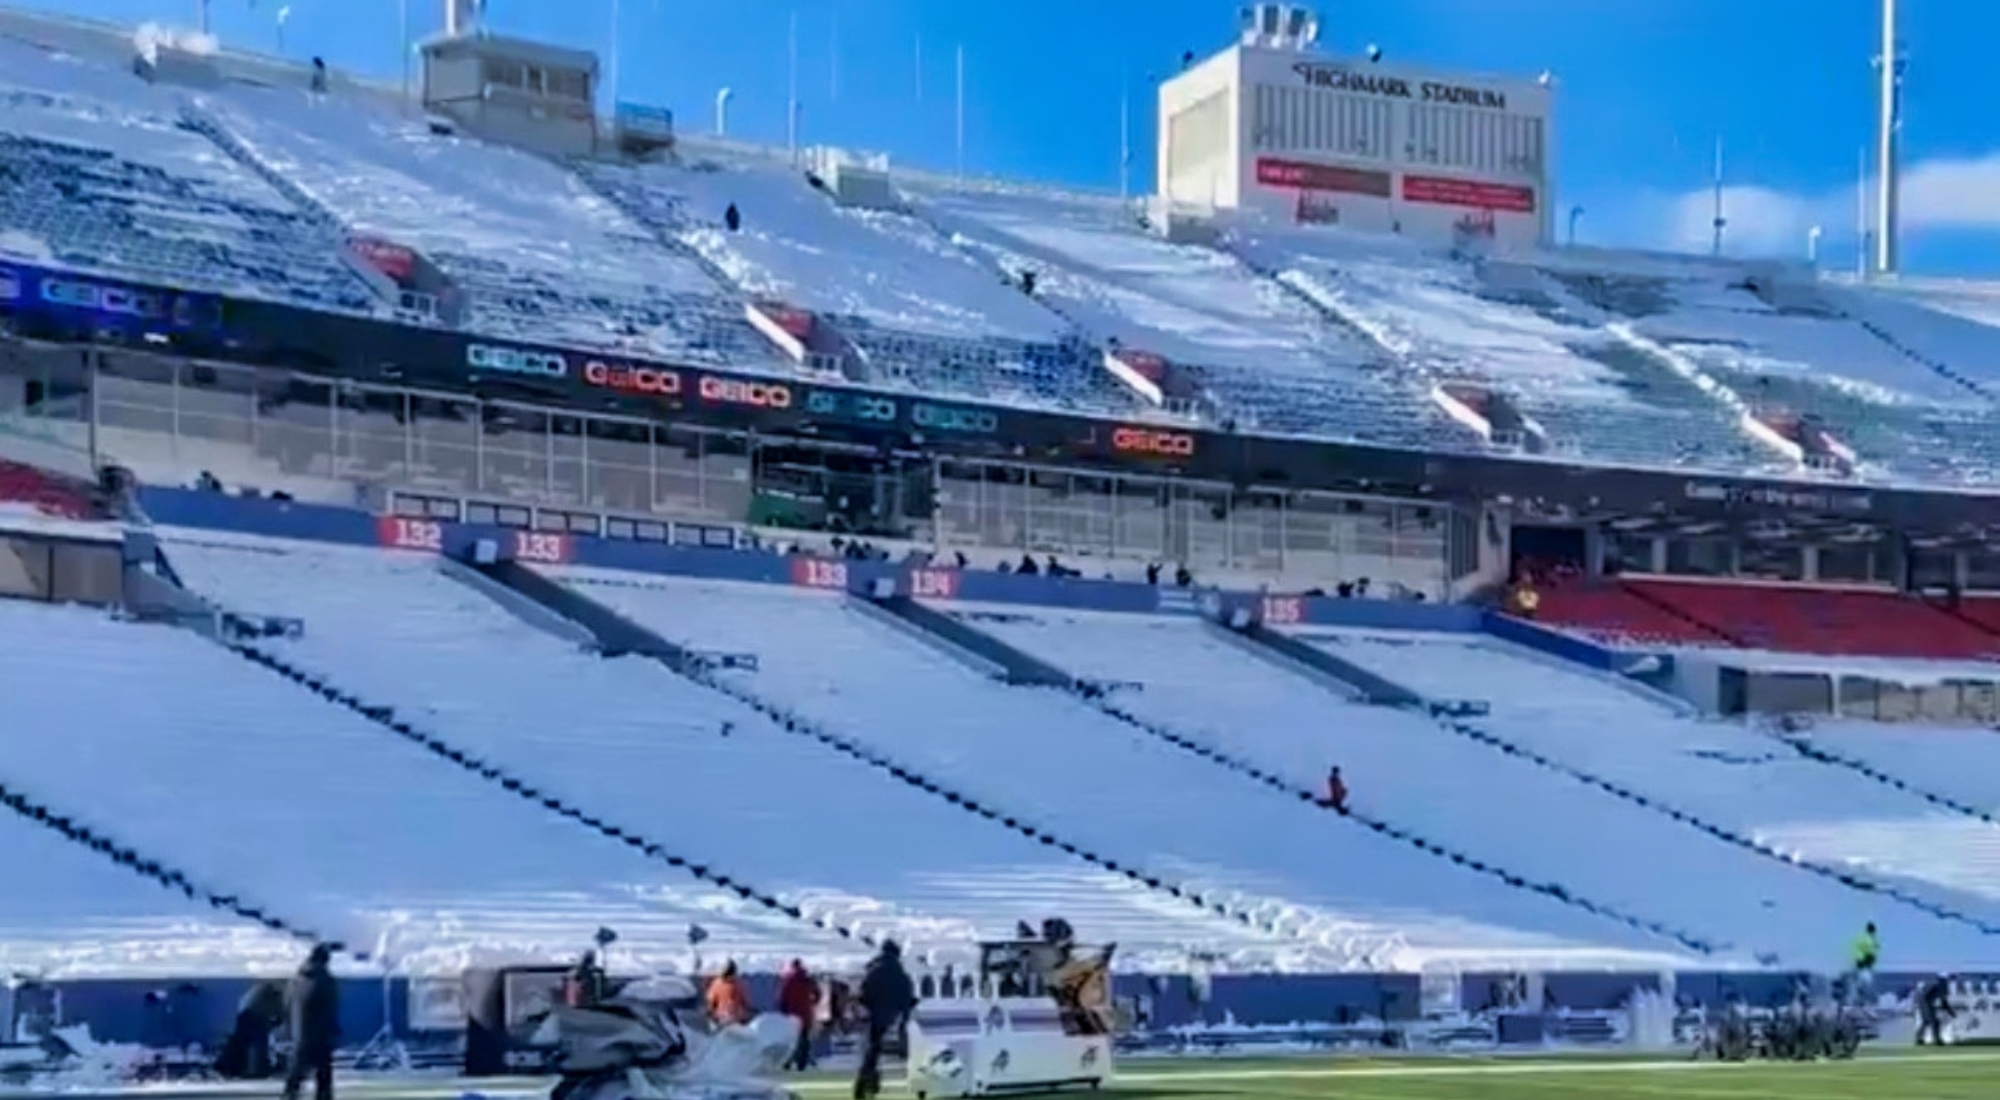 Bills Fans Have Stadium In Perfect Condition For Monday (VIDEO)